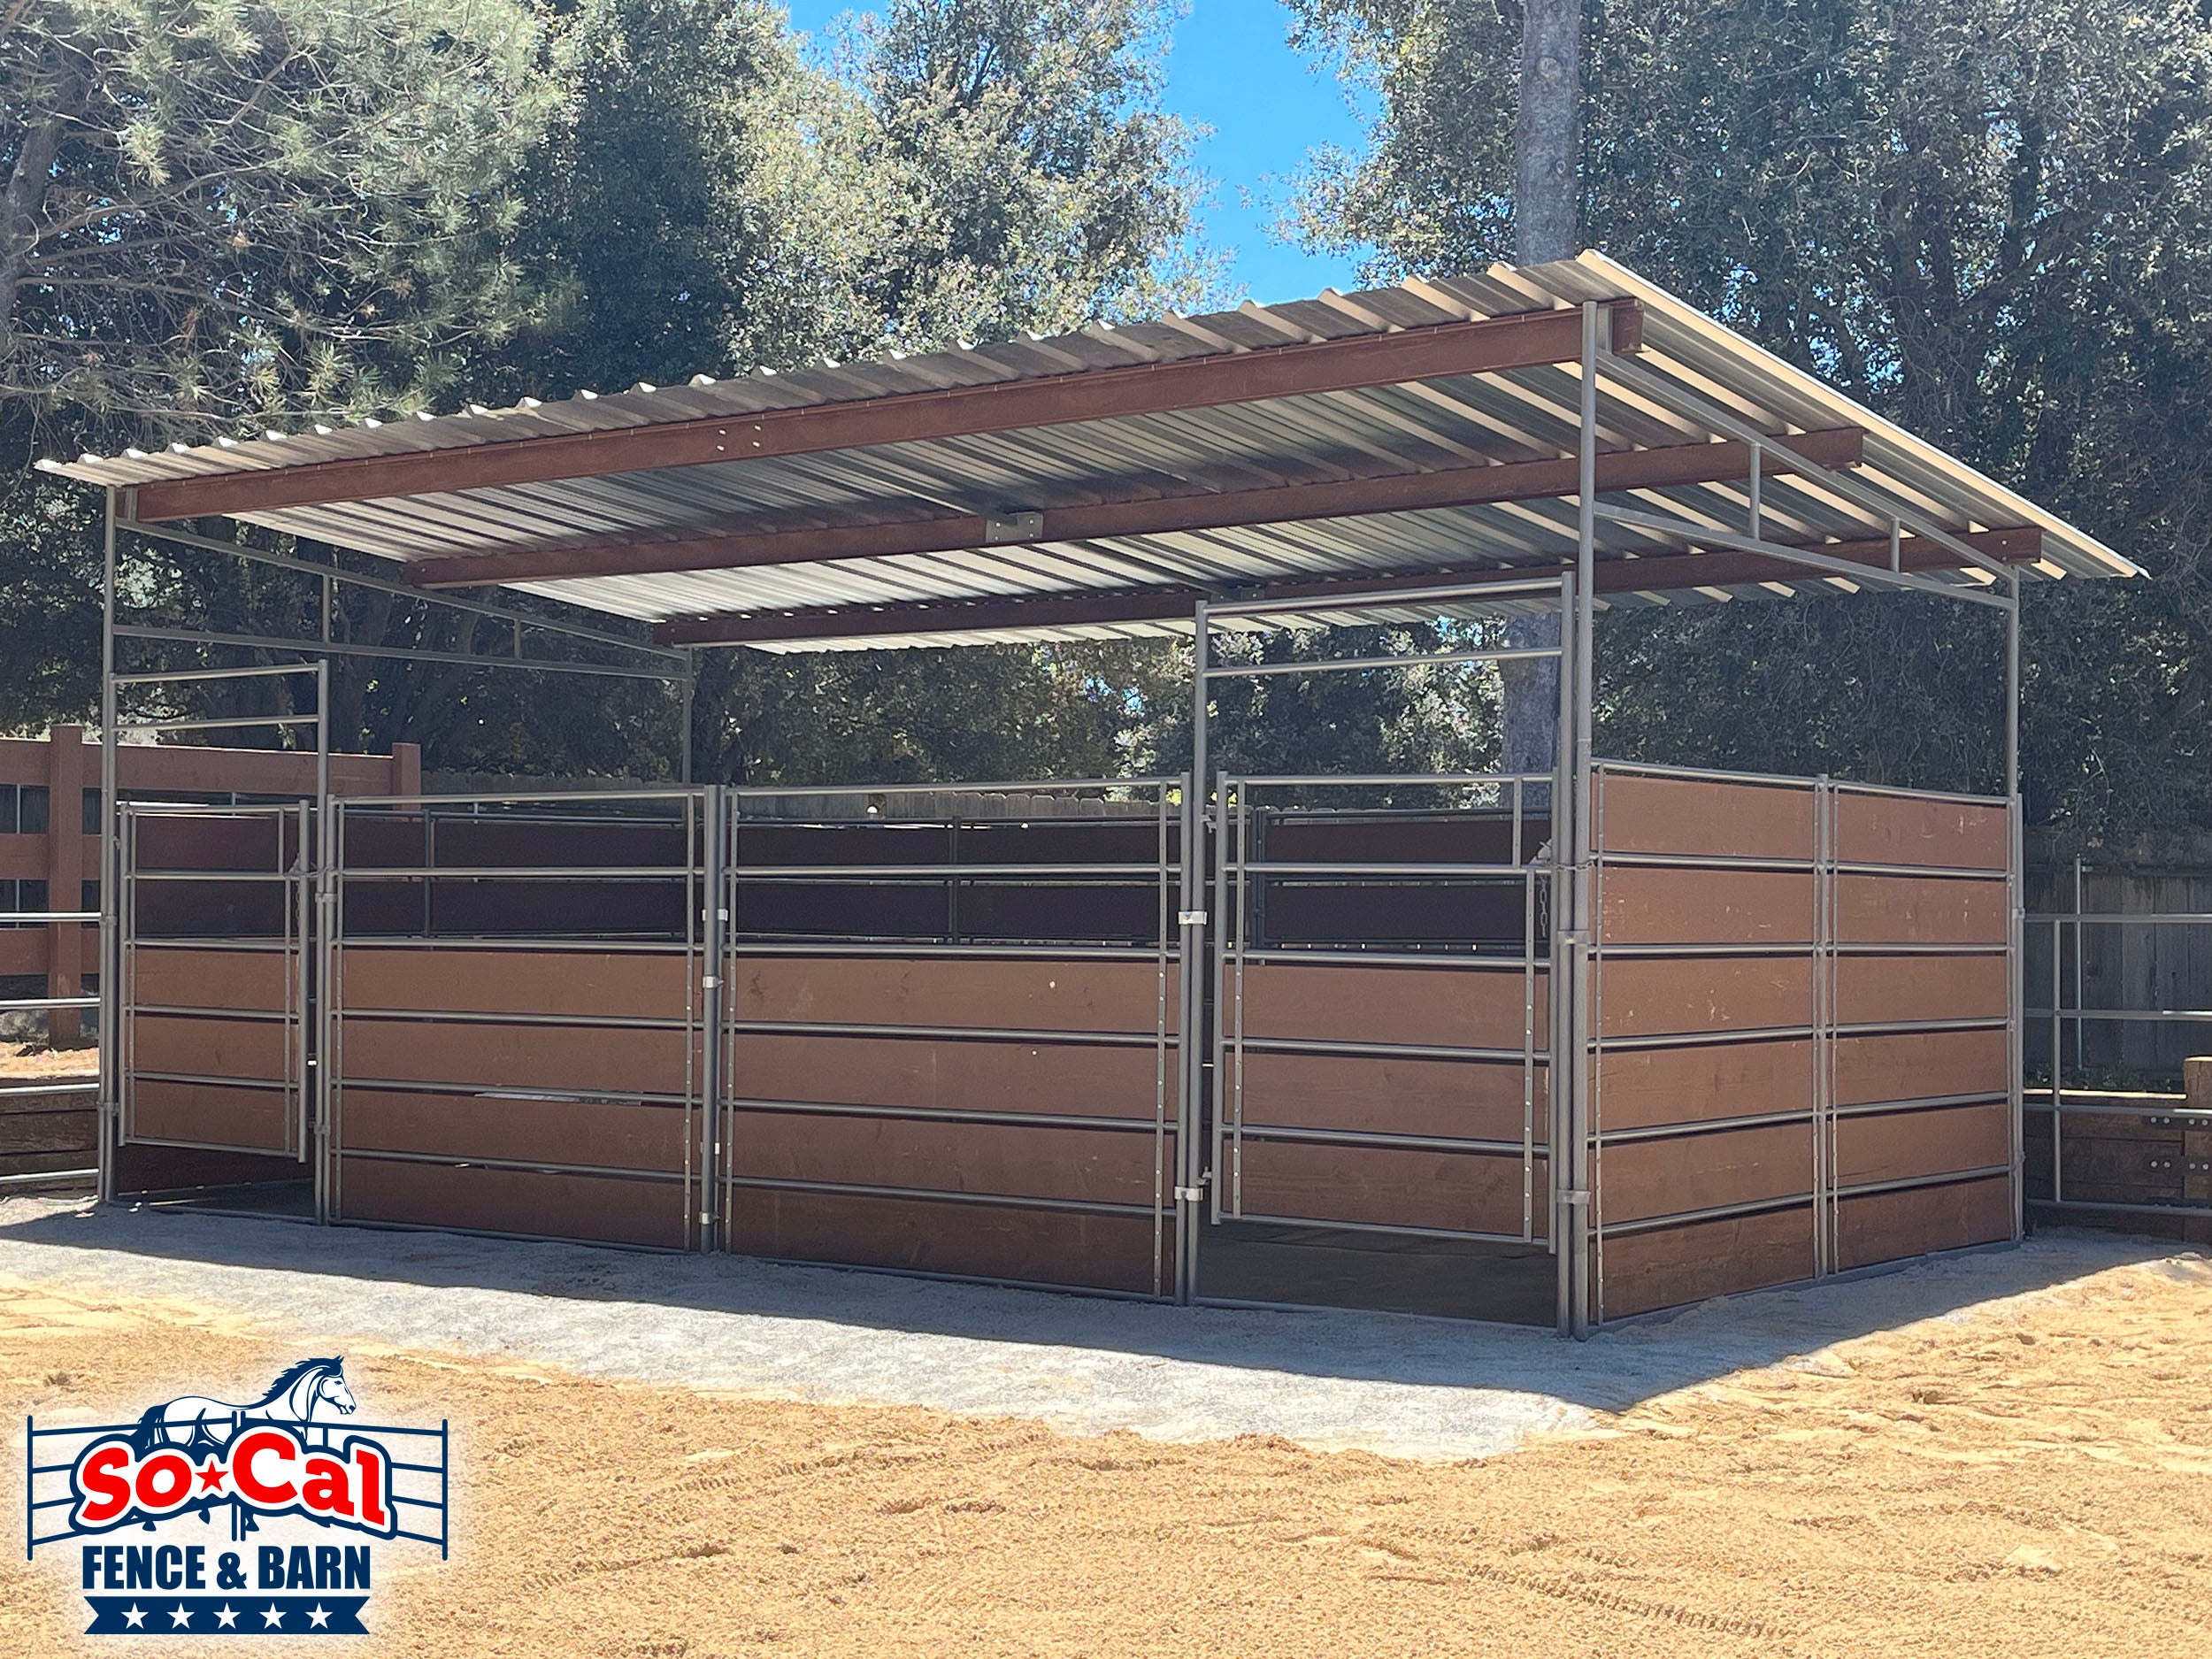 Easy 12x24 Horse Stall Build With Wood Panels